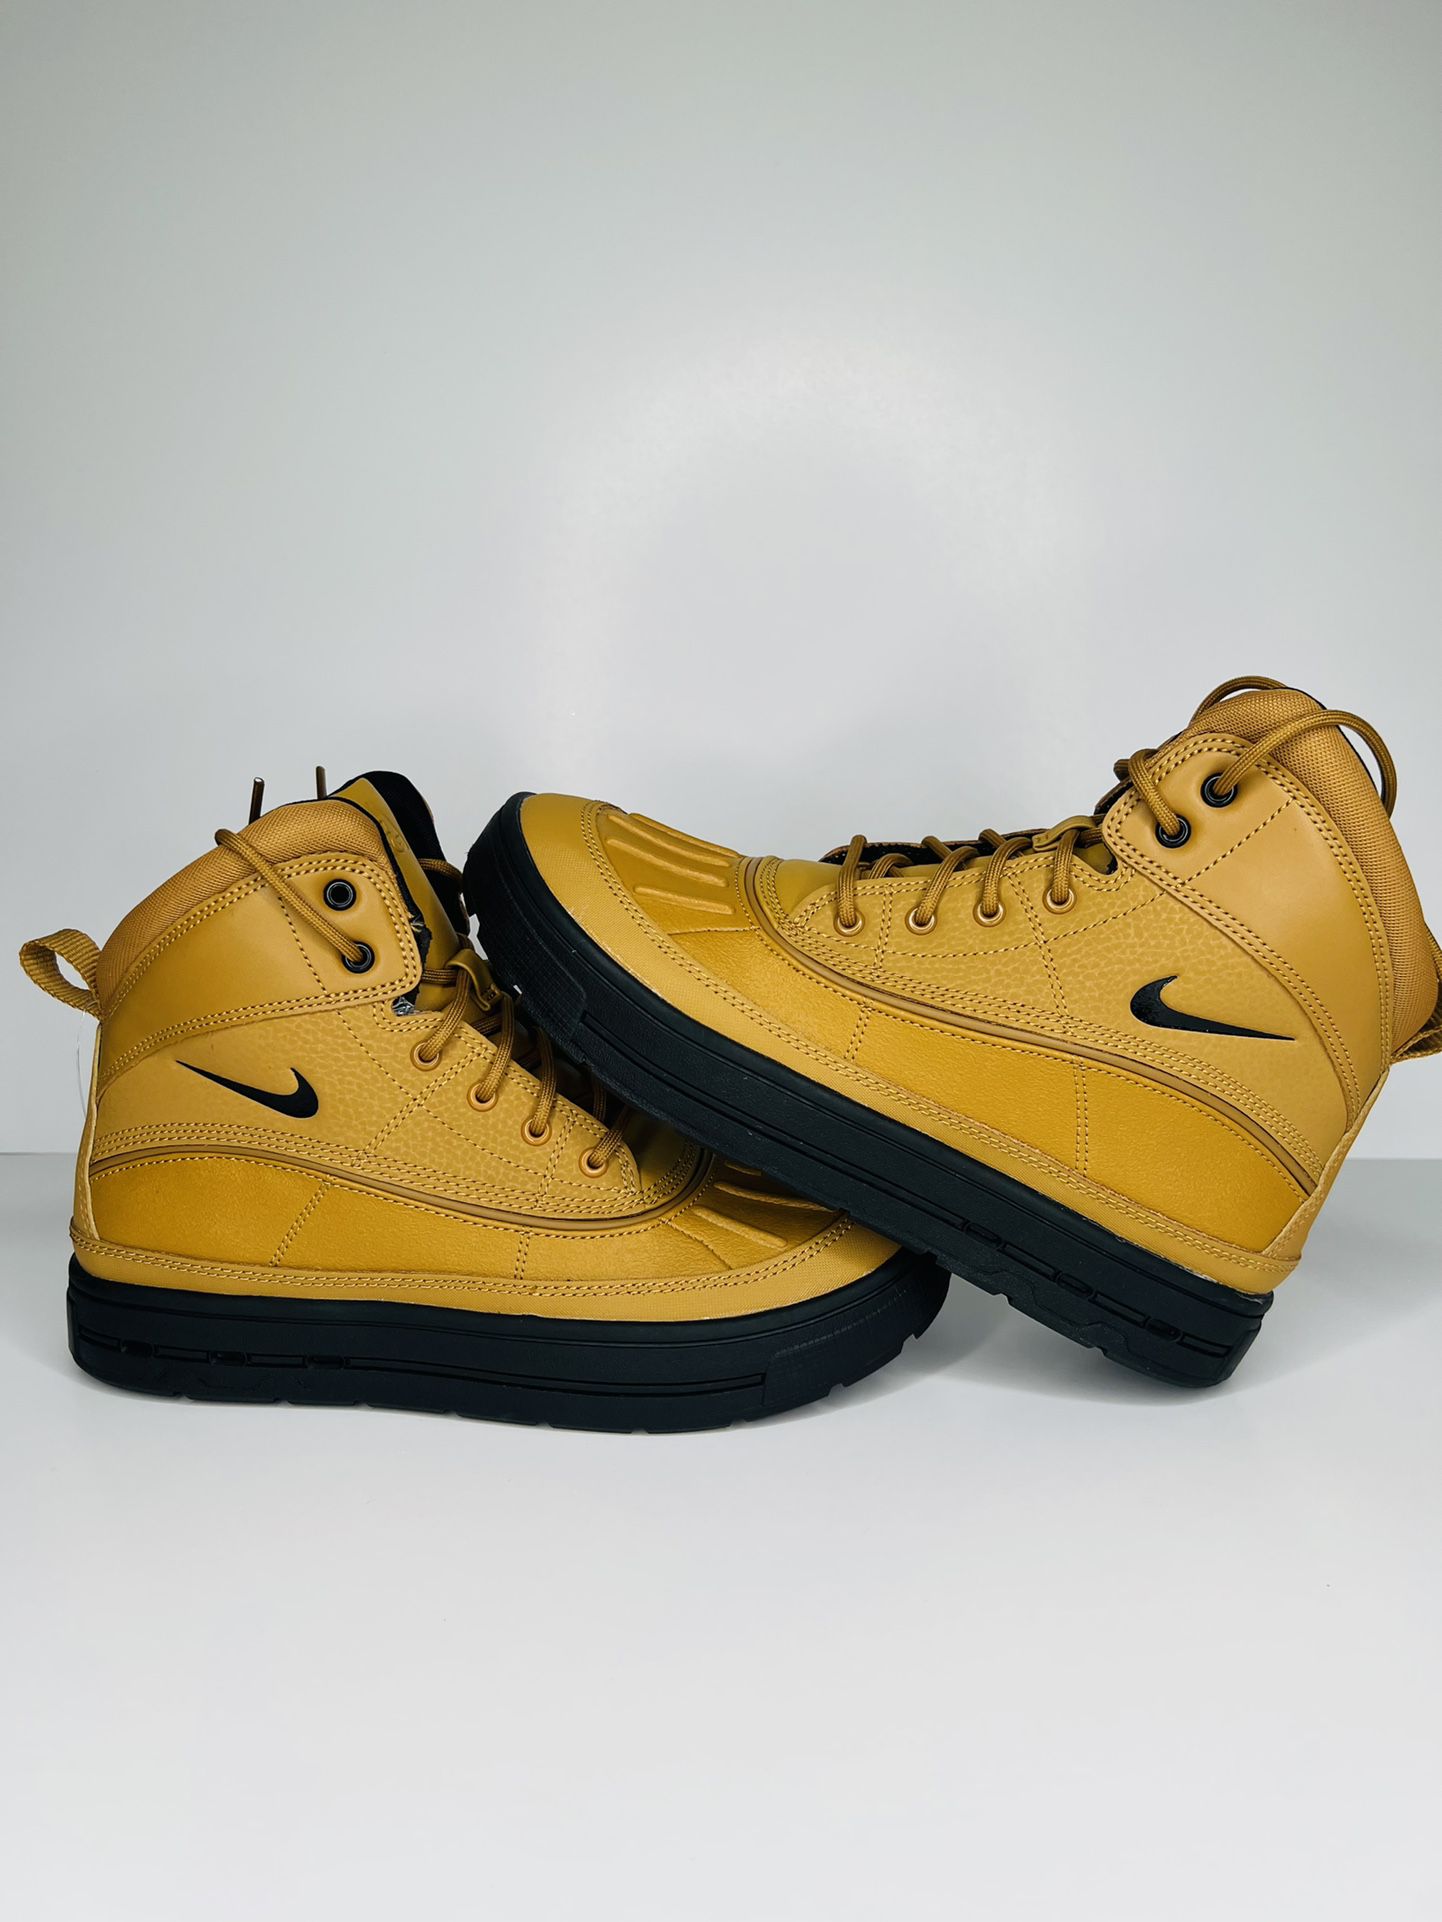 Nike Youth ACG Woodside 2 II Wheat Black  524872-703 Snow Hiking Boots Size 6.5Y Women size 8 Brand new without original box  100% authentic  Fast shi